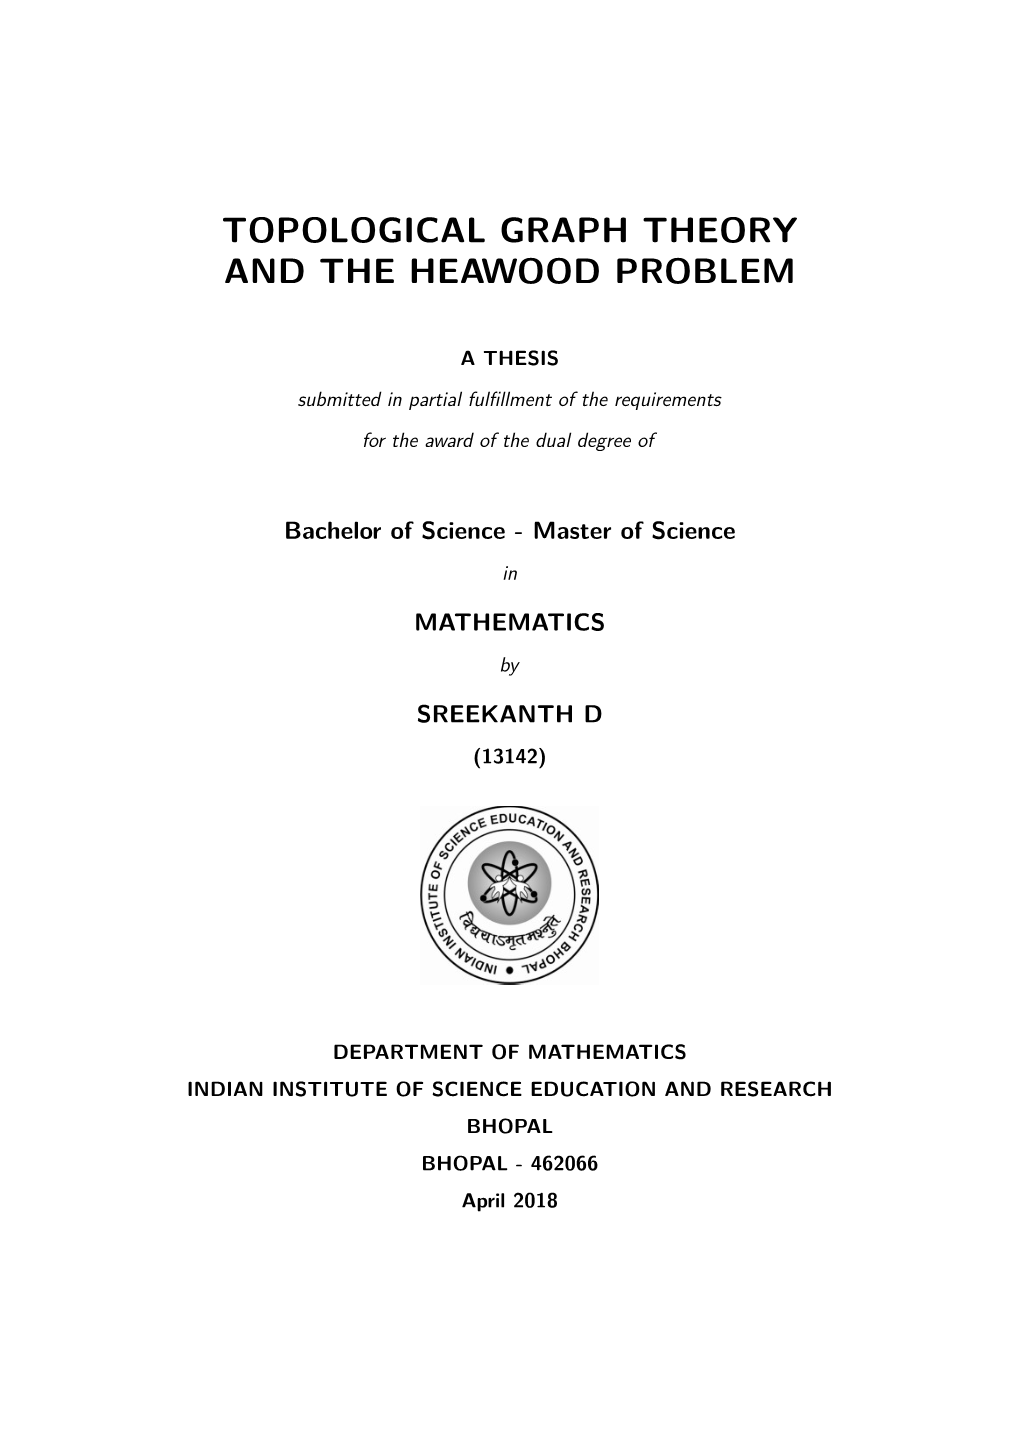 Topological Graph Theory and the Heawood Problem